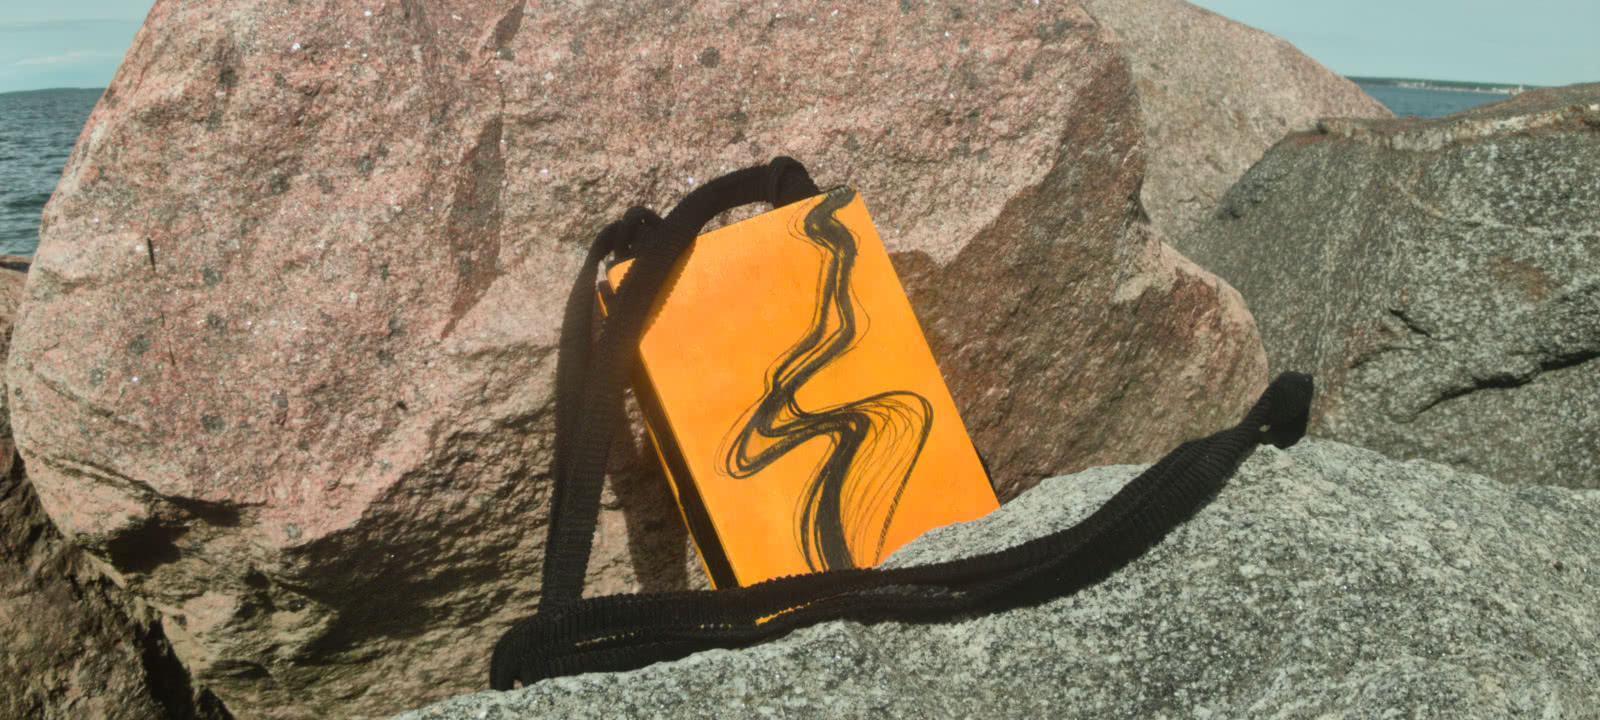 A yellow bag, made of wood and textile, with rocks